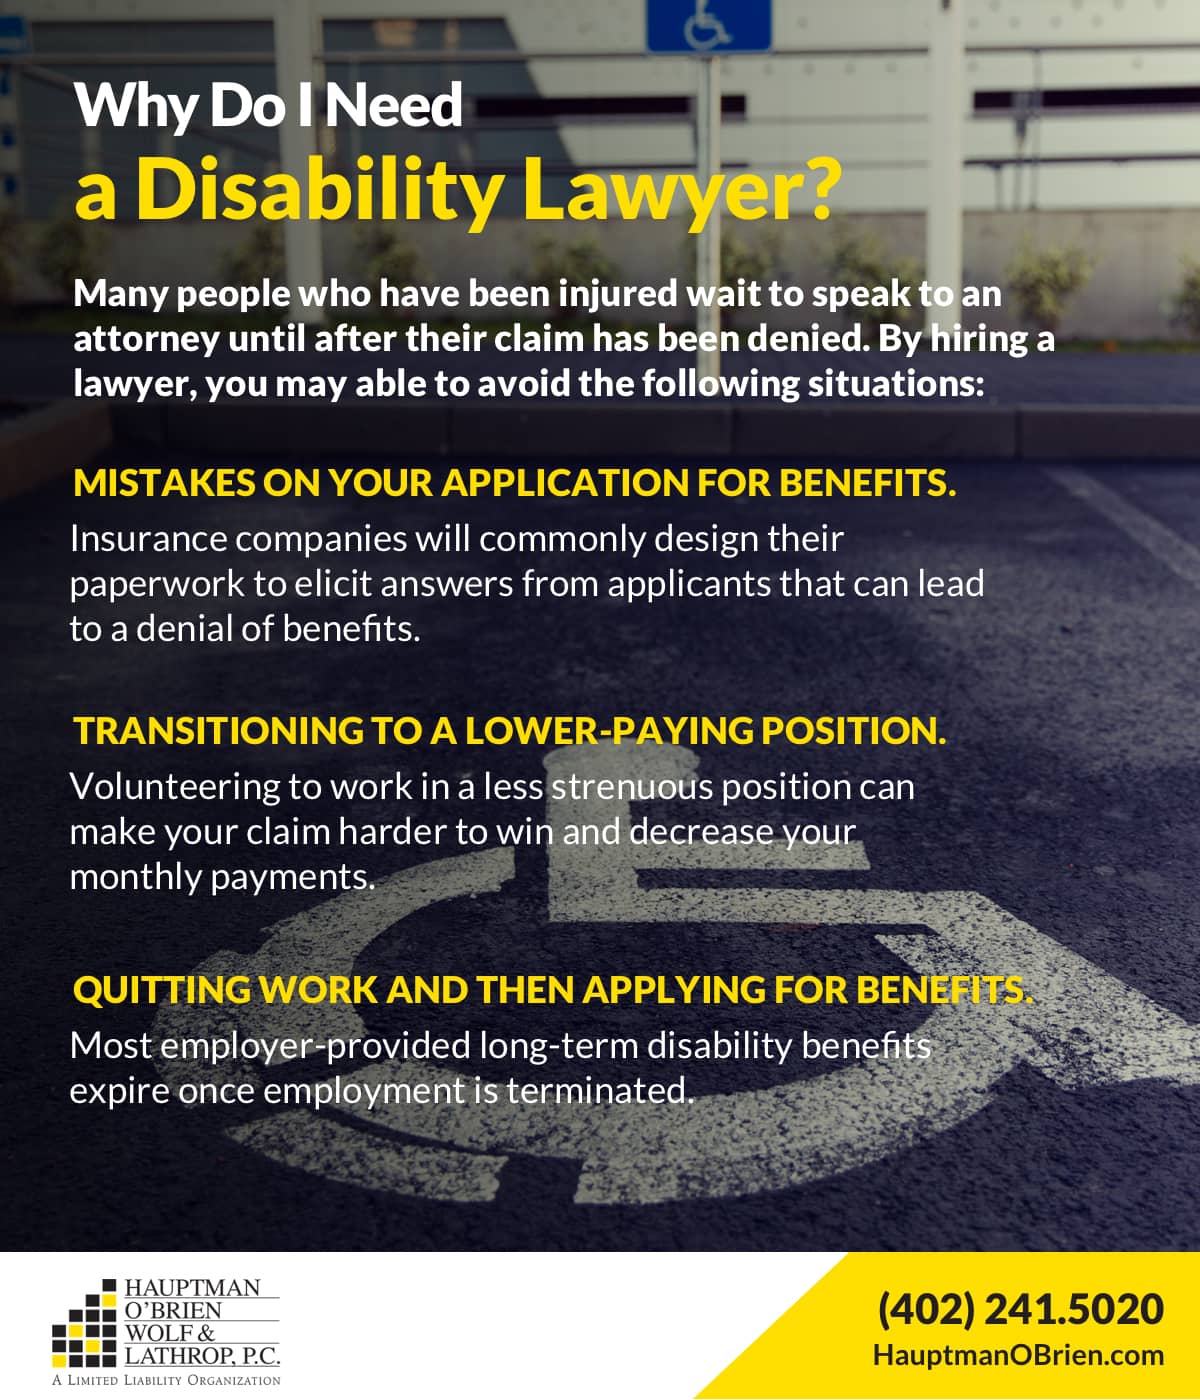 Why Do I Need a Disability Lawyer?